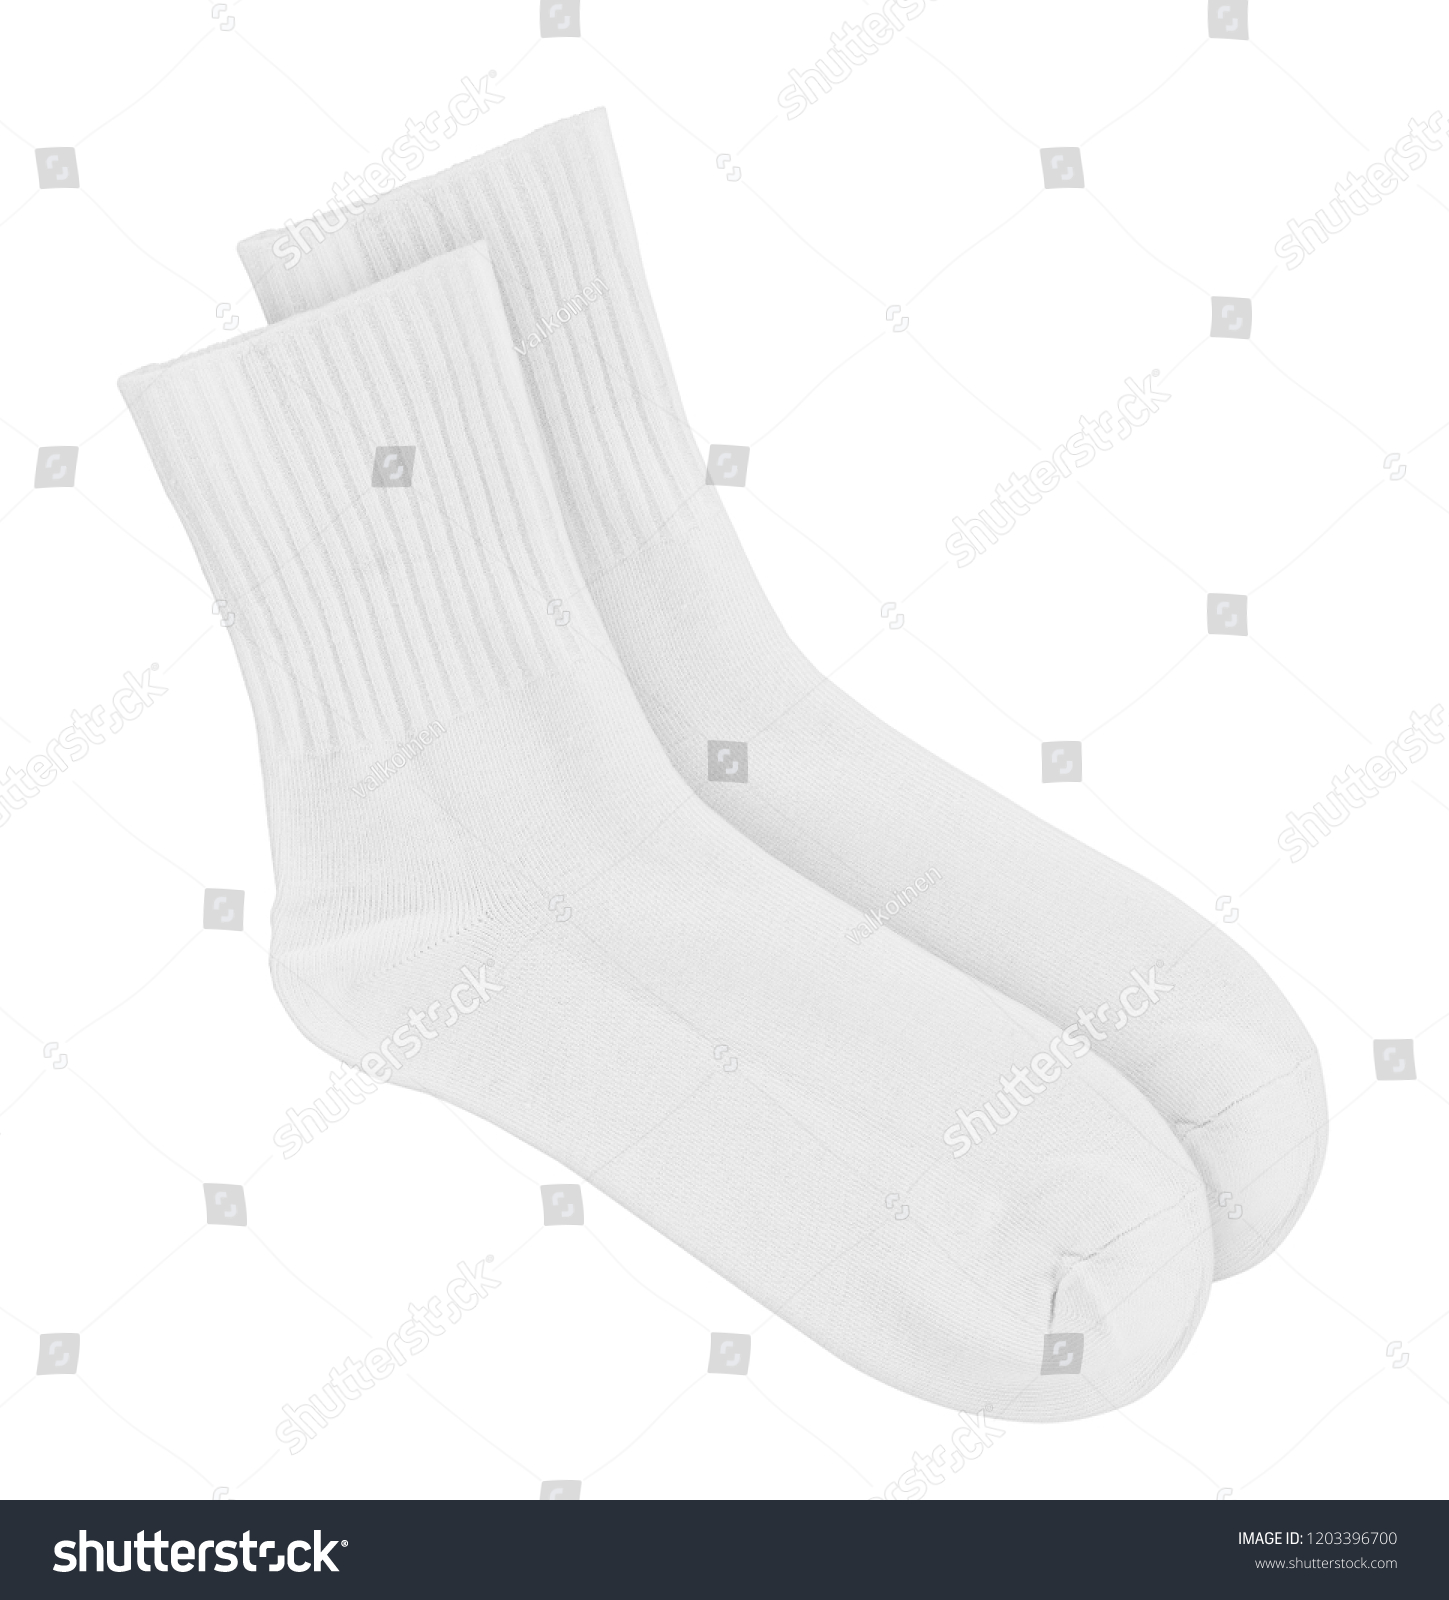 Tall white socks on an isolated white background #1203396700